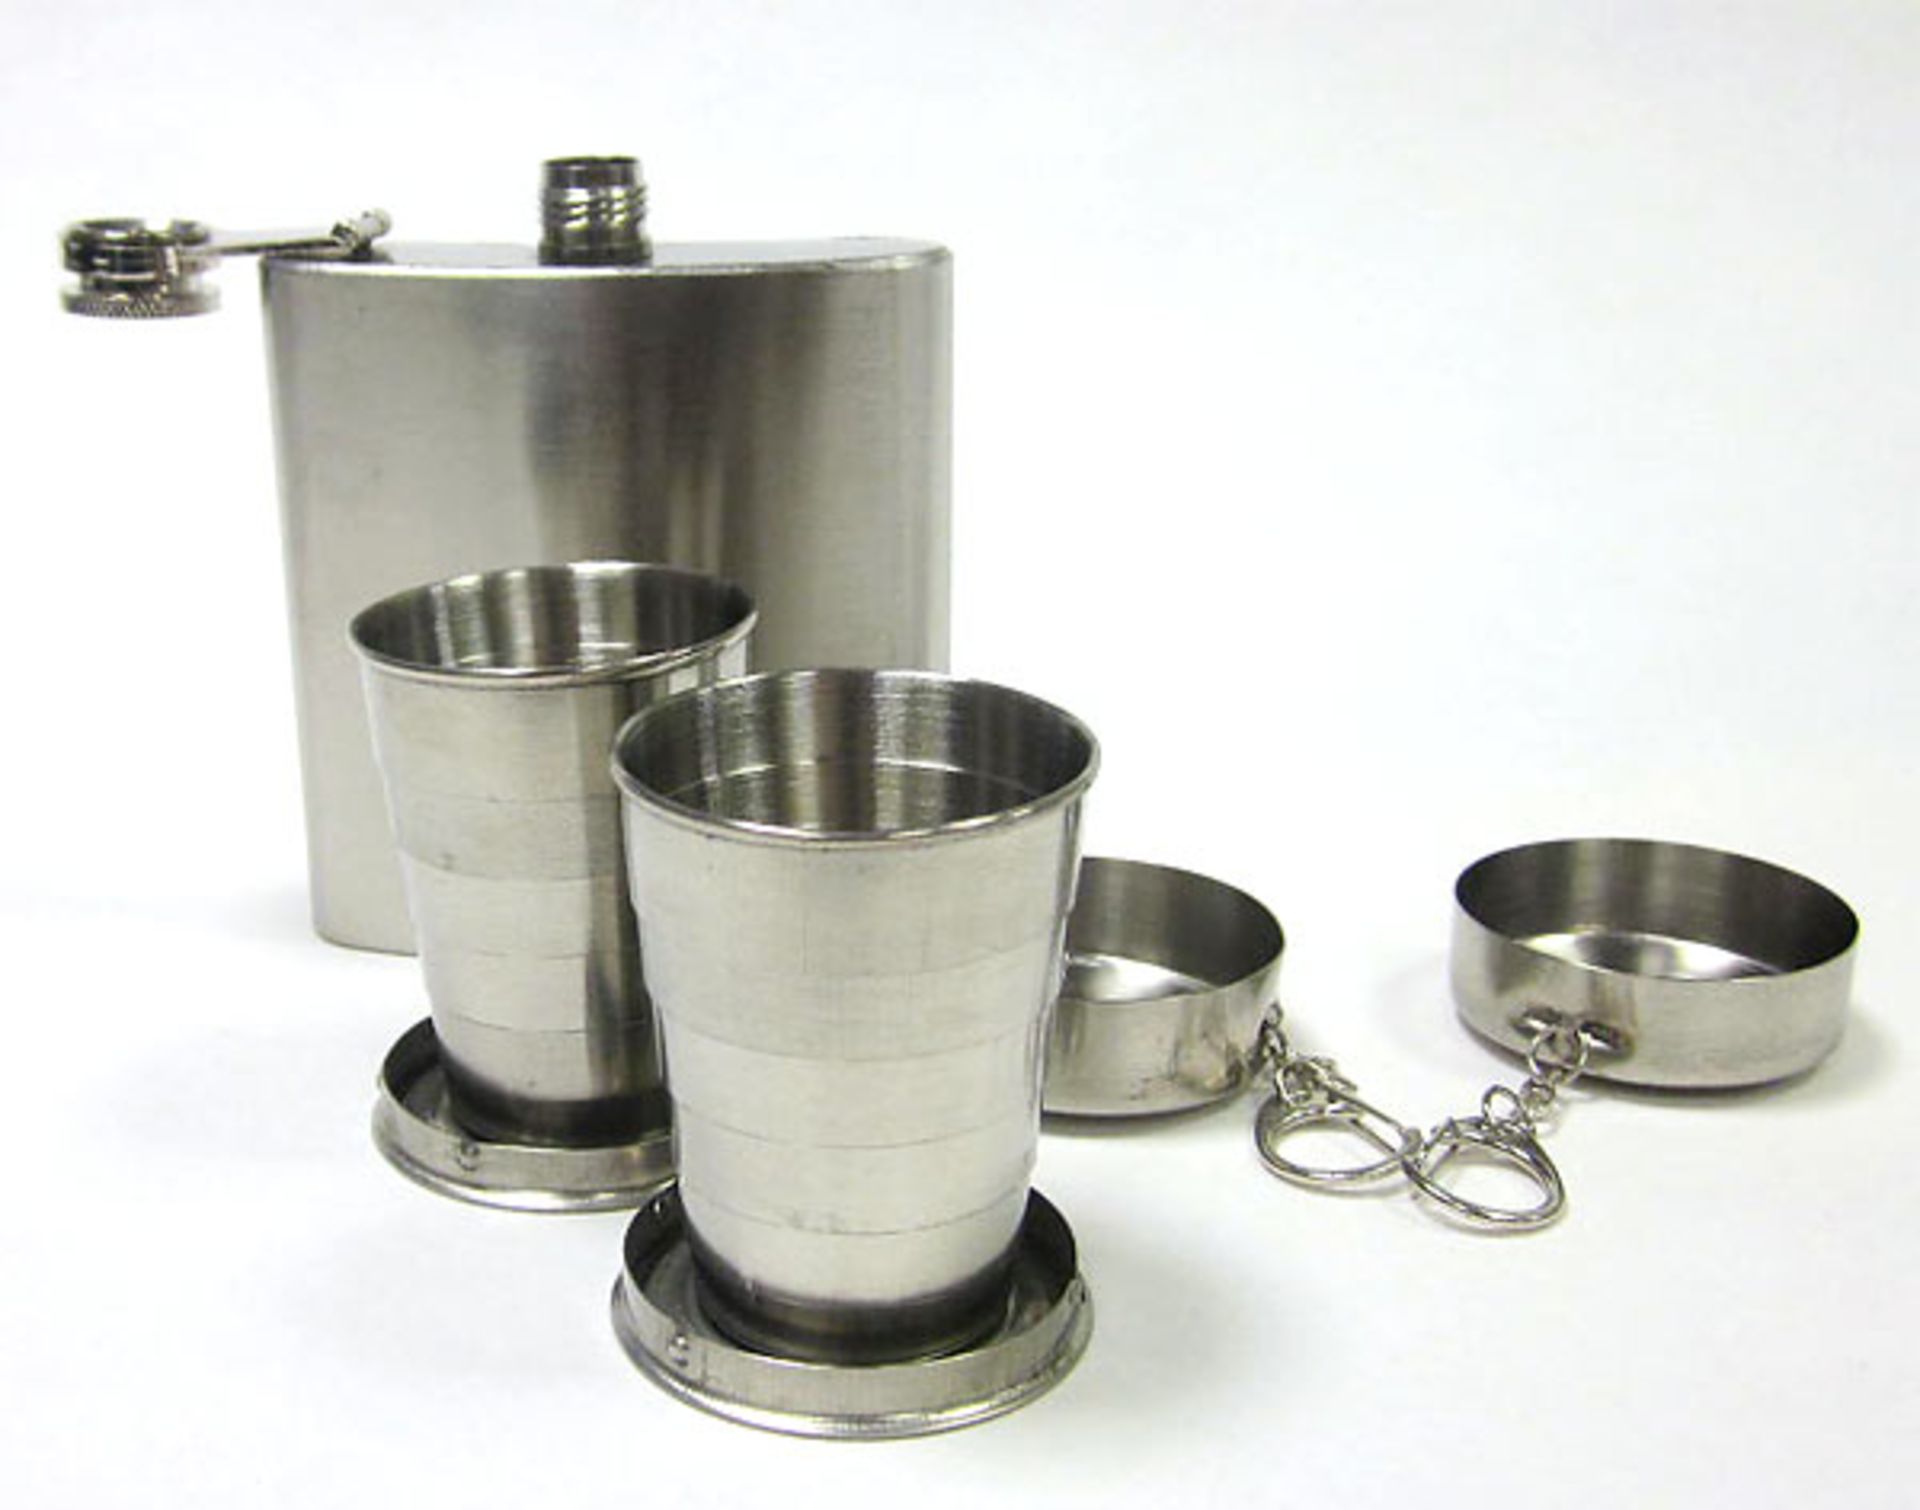 V Brand New Stainless Steel Hip Flask And Cup Set X 2 YOUR BID PRICE TO BE MULTIPLIED BY TWO